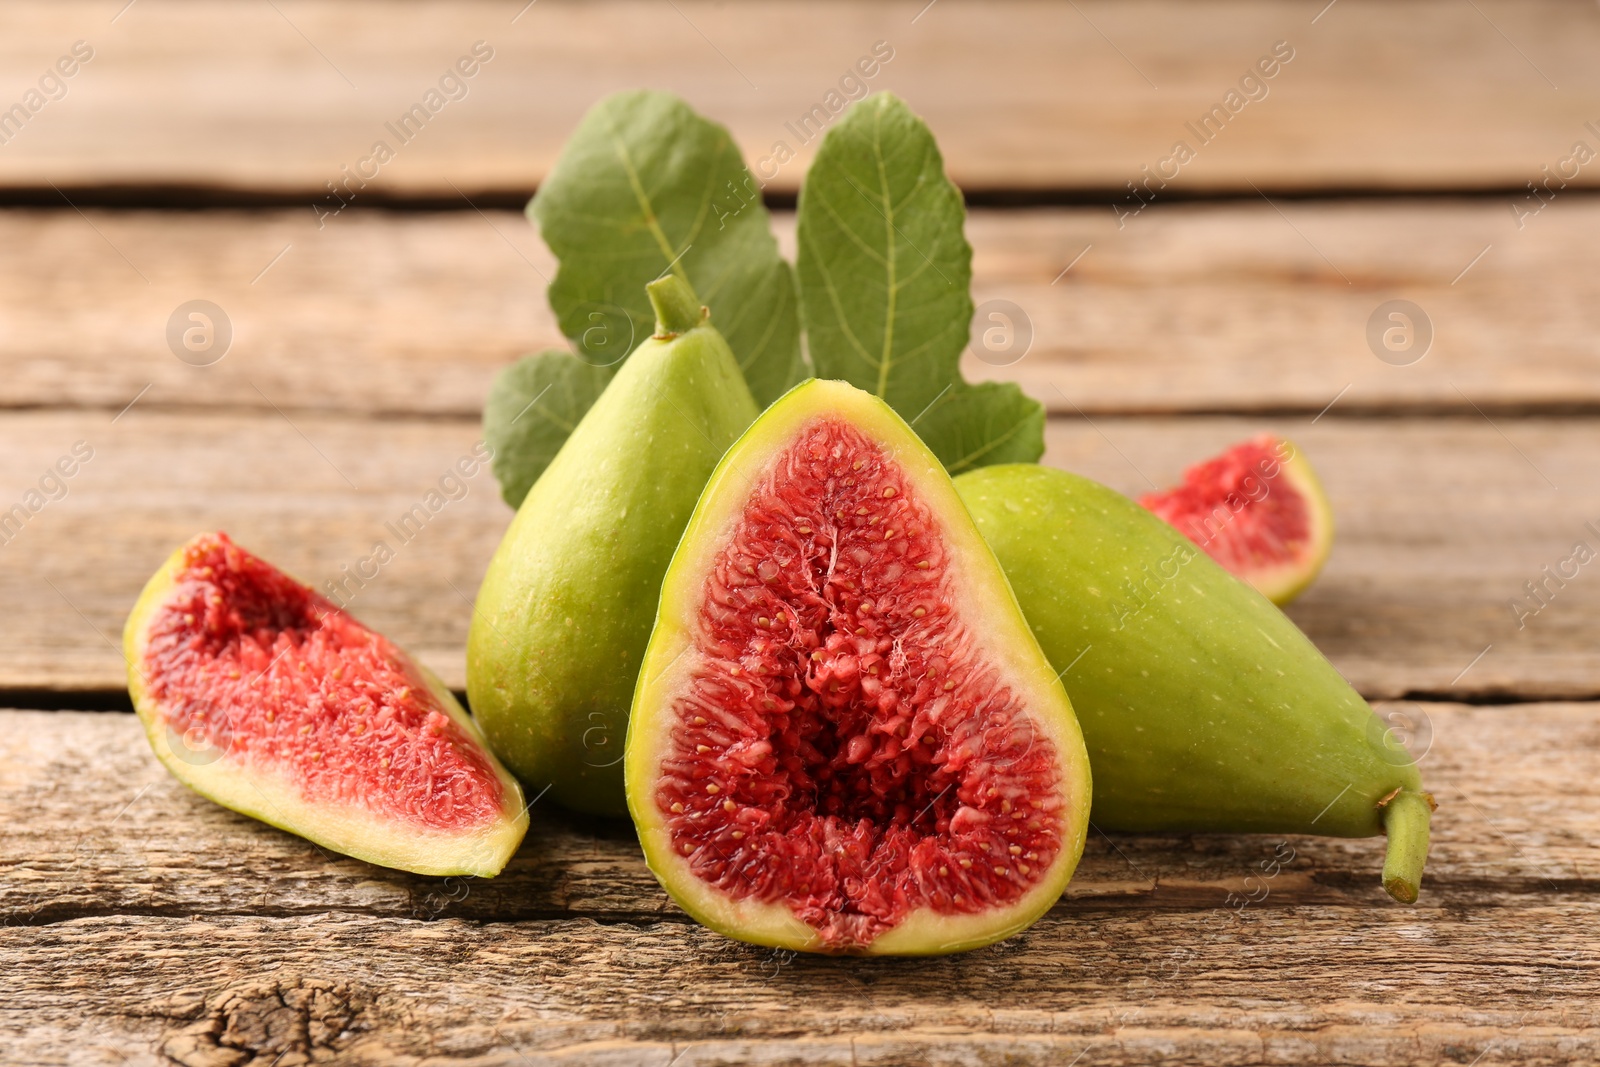 Photo of Cut and whole green figs on wooden table, closeup